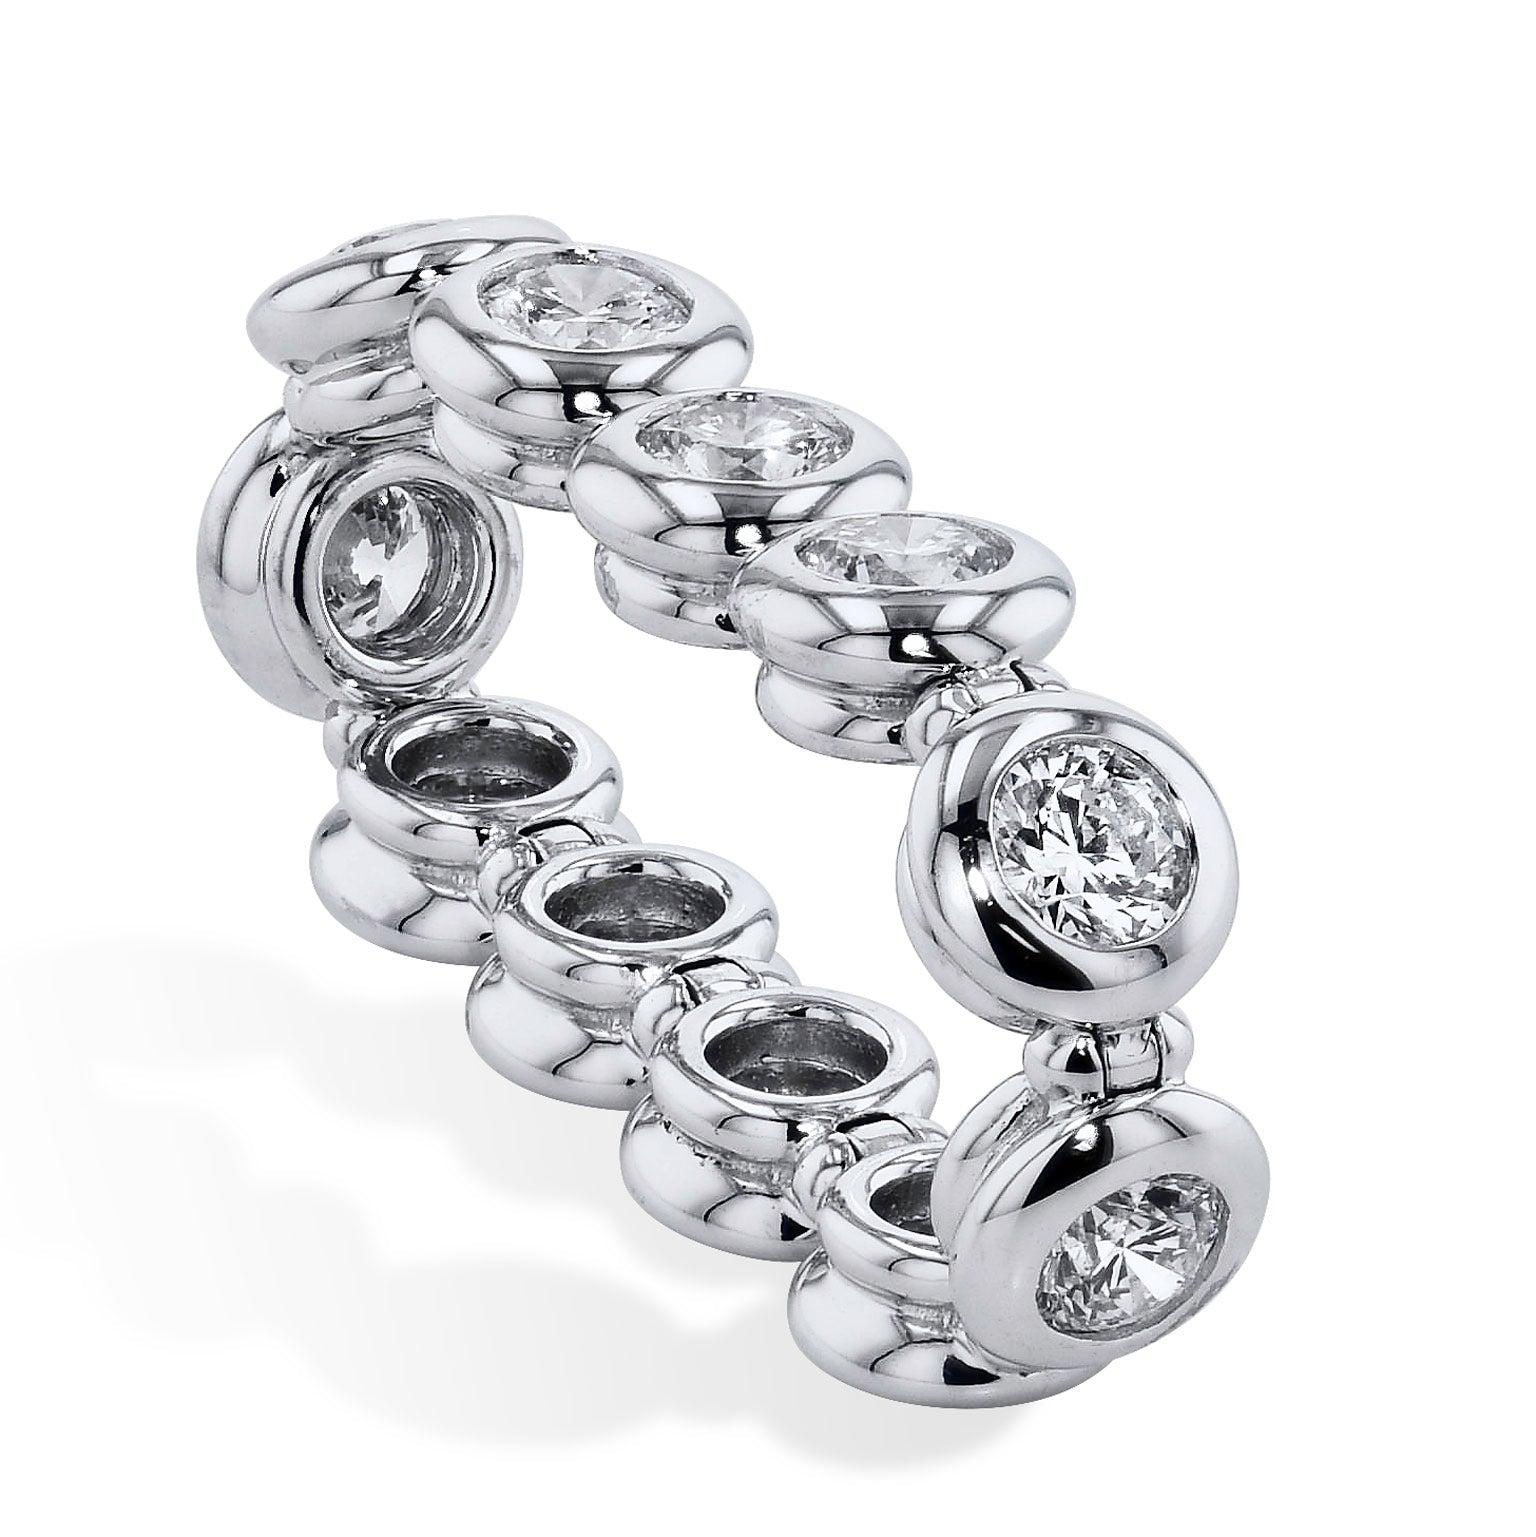 This handcrafted 18 karat white gold eternity flexi-band ring features eleven diamonds bezel-set and placed together to produce 1.63 carat (F/G/VS2) of brilliance. This band ring stirs and illuminates the essence of her beauty.

